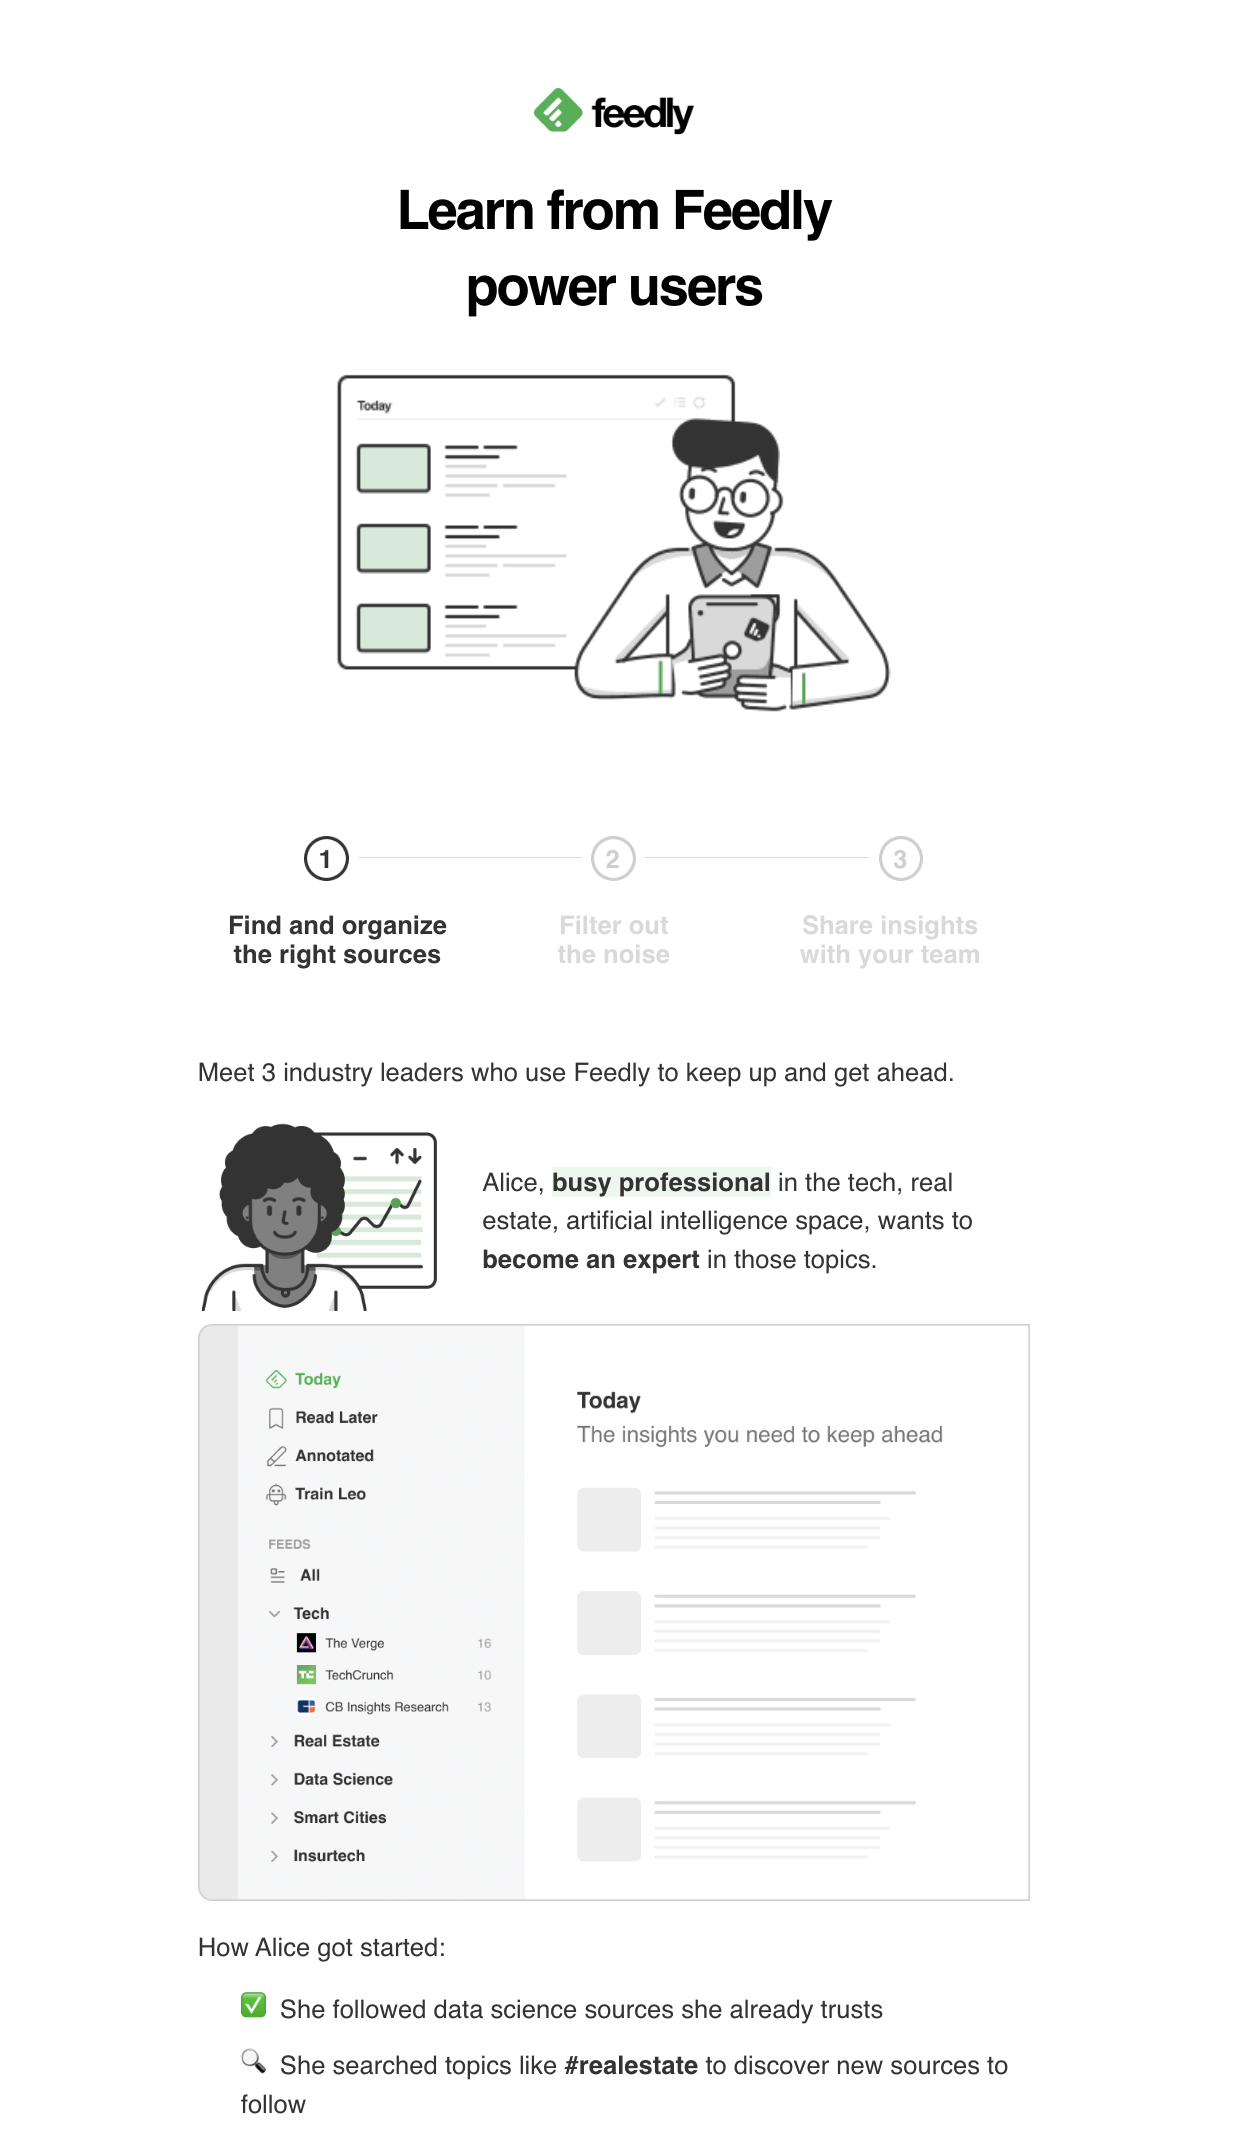 Case Study Email Examples: Screenshot of Feedly's email showcasing use cases told through imaginary personas